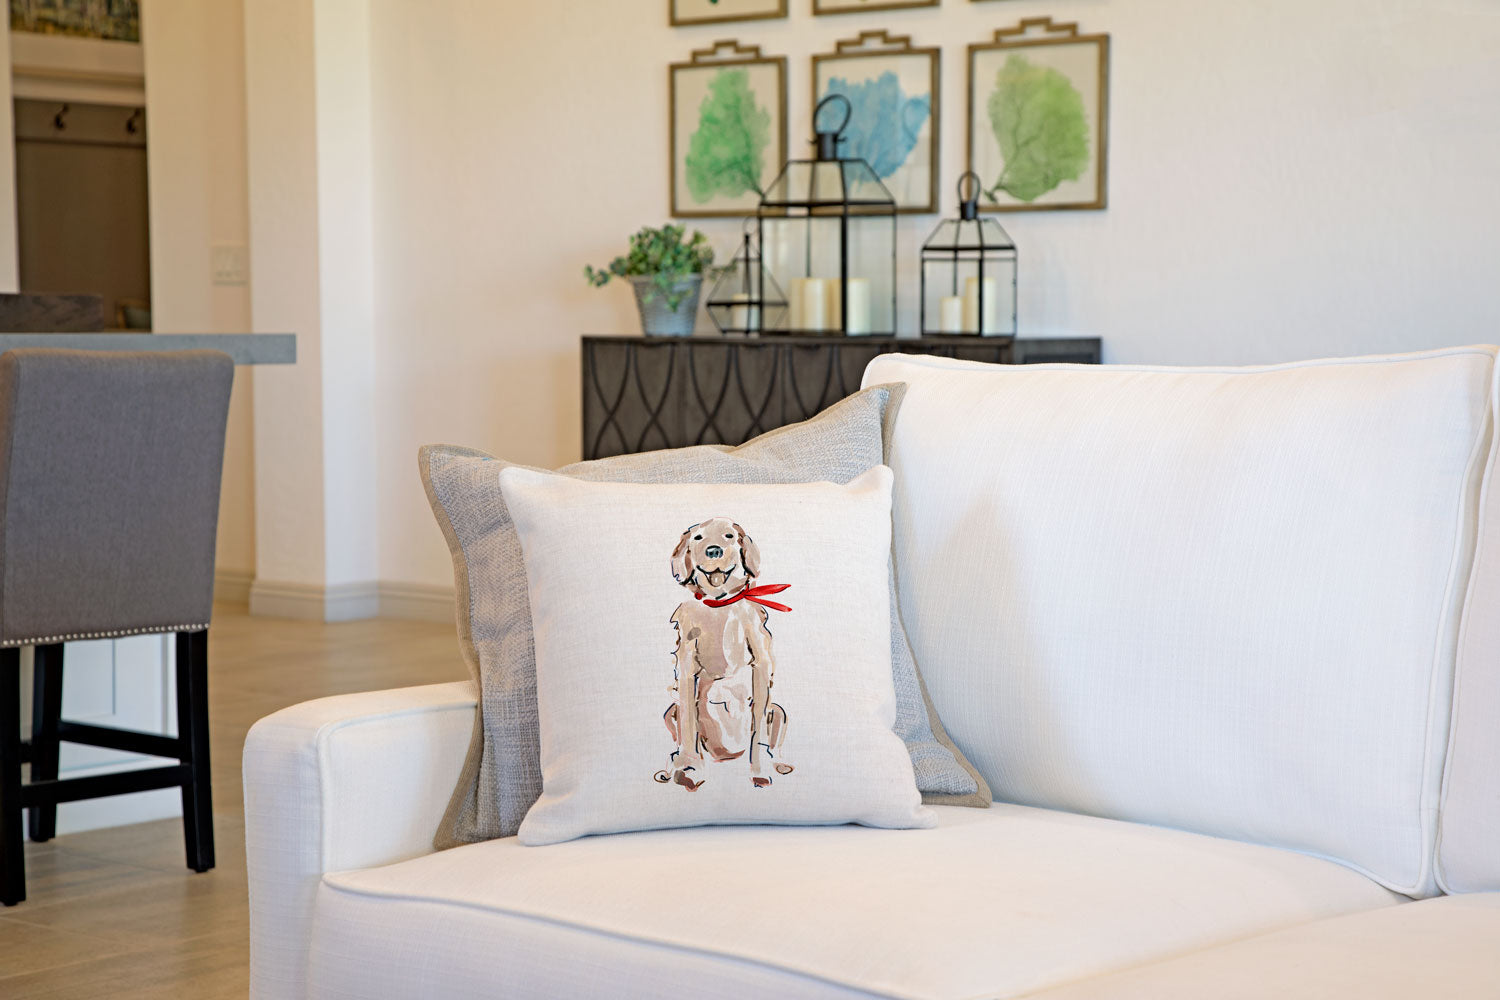 Rickie Retriever Throw Pillow Cover - Dog Illustration Throw Pillow Cover Collection-Di Lewis